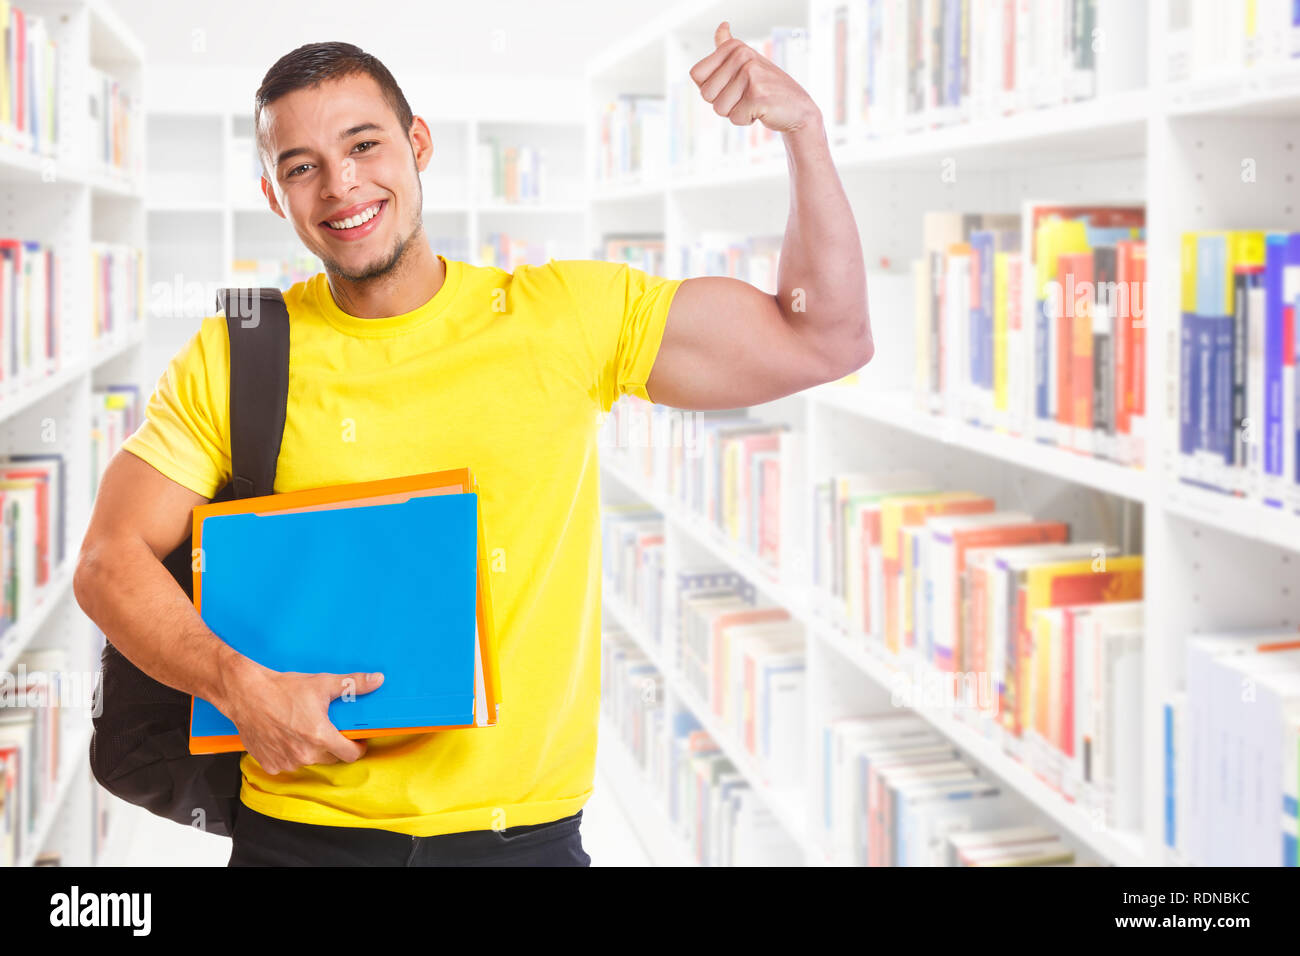 Student young man success successful strong power library education people learning Stock Photo